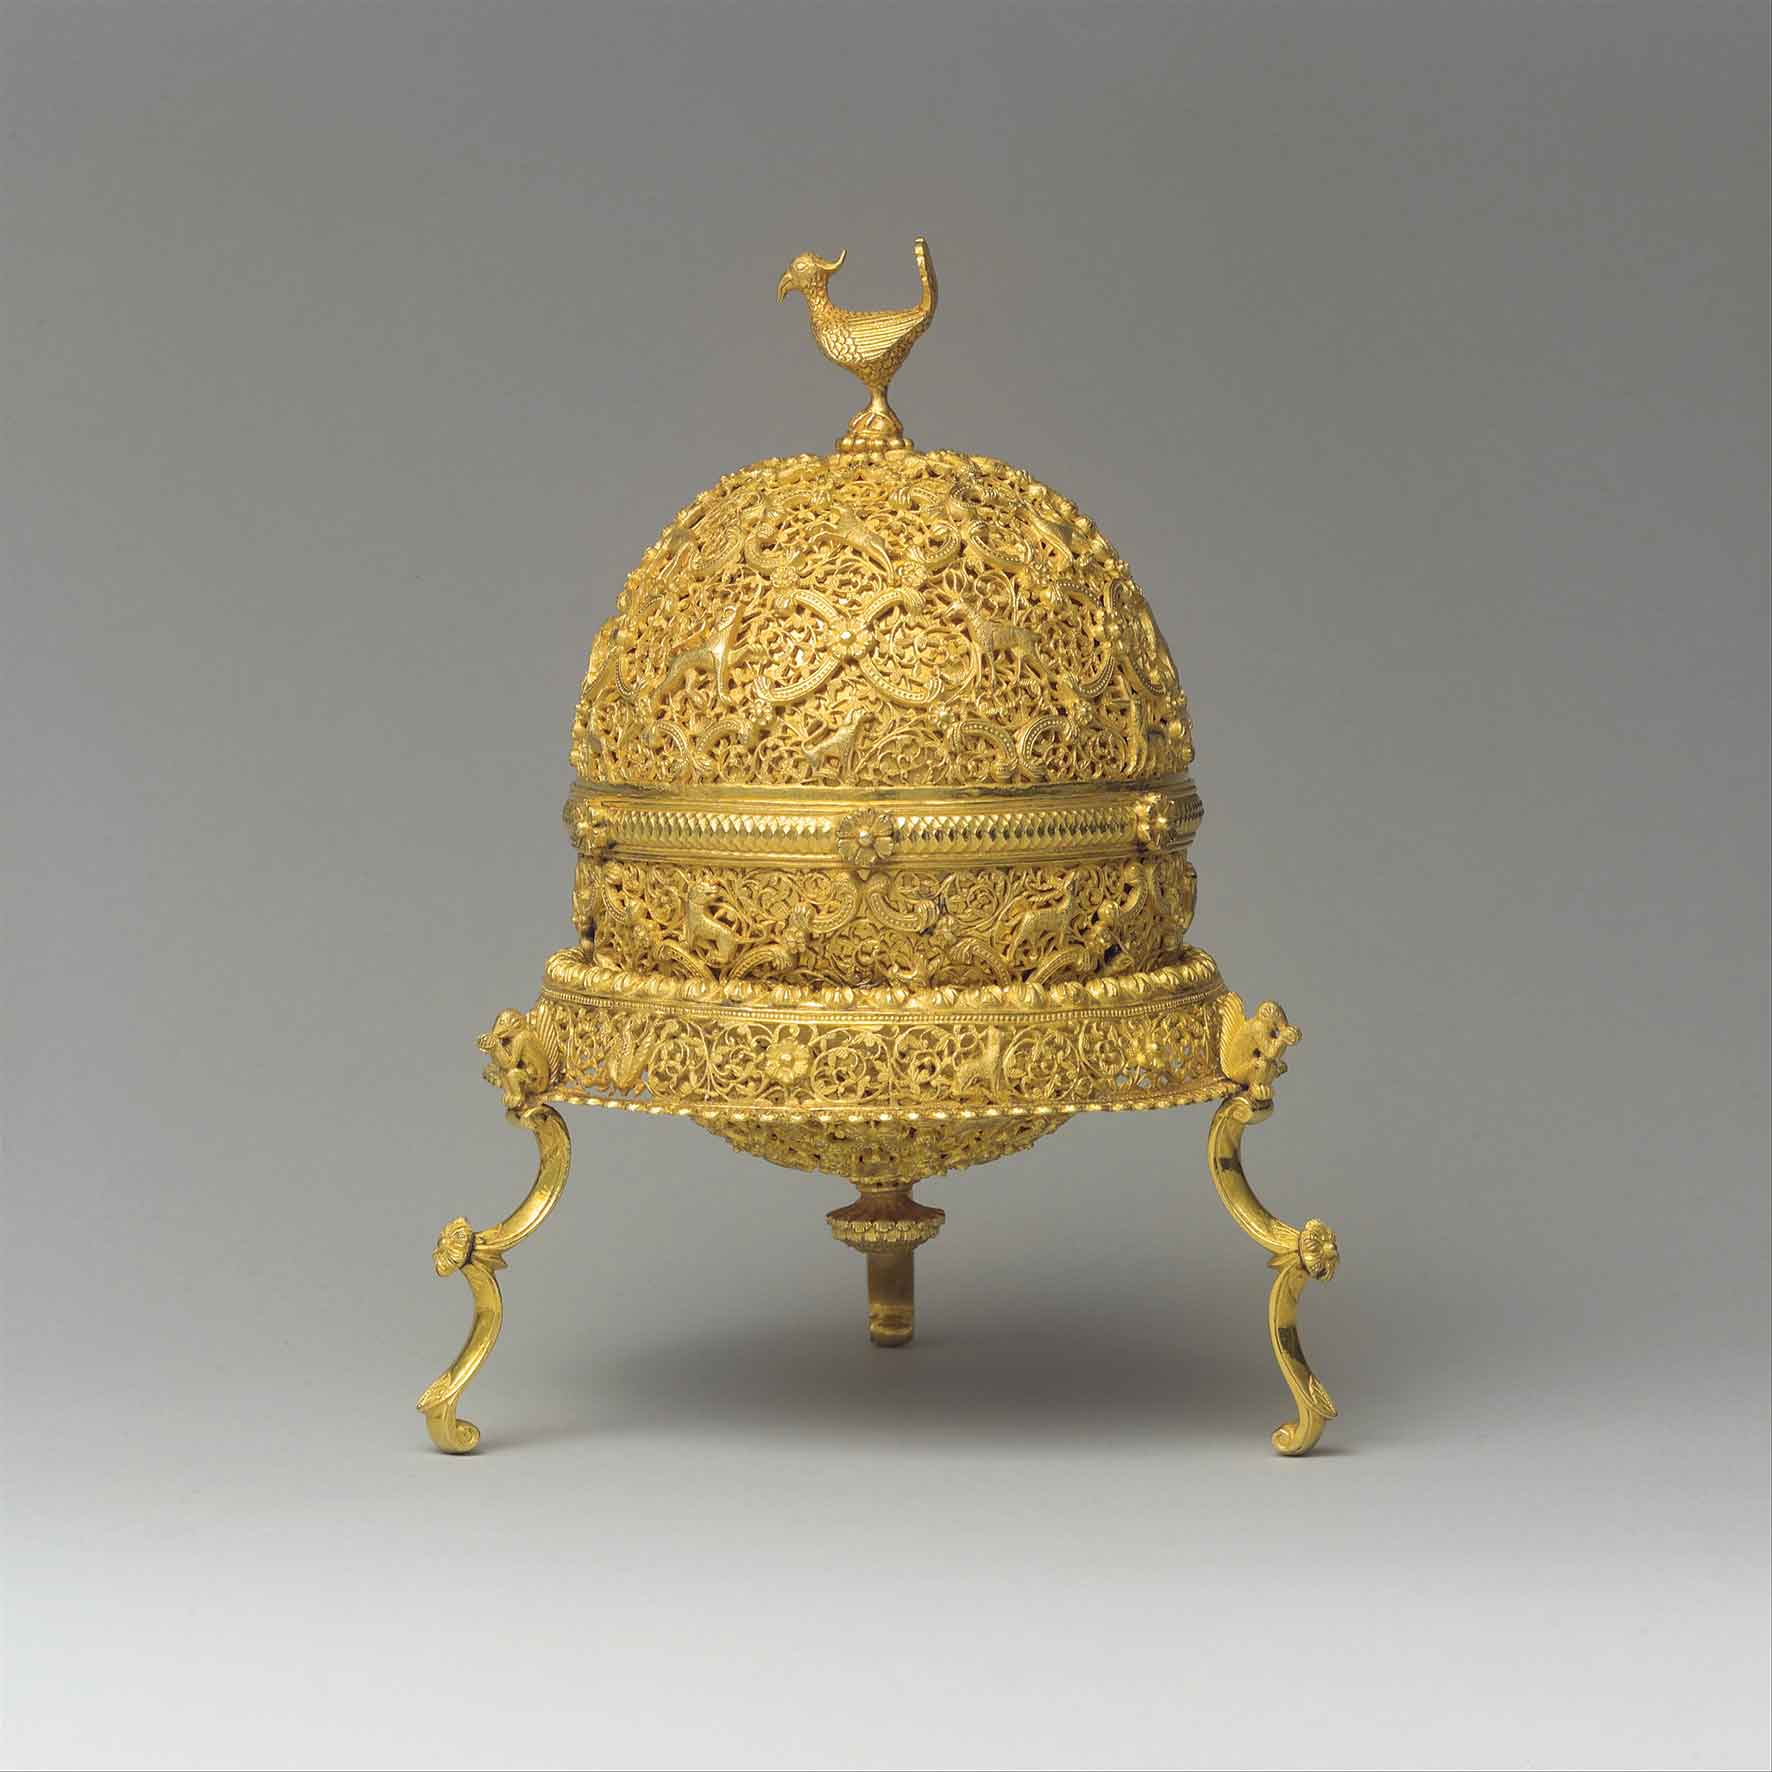 Goa Stone and gold case with gold filigree and repoussé, with cast legs and finial, probably made in Goa, late 17th/early 18th century, The Metropolitan Museum of Art, New York